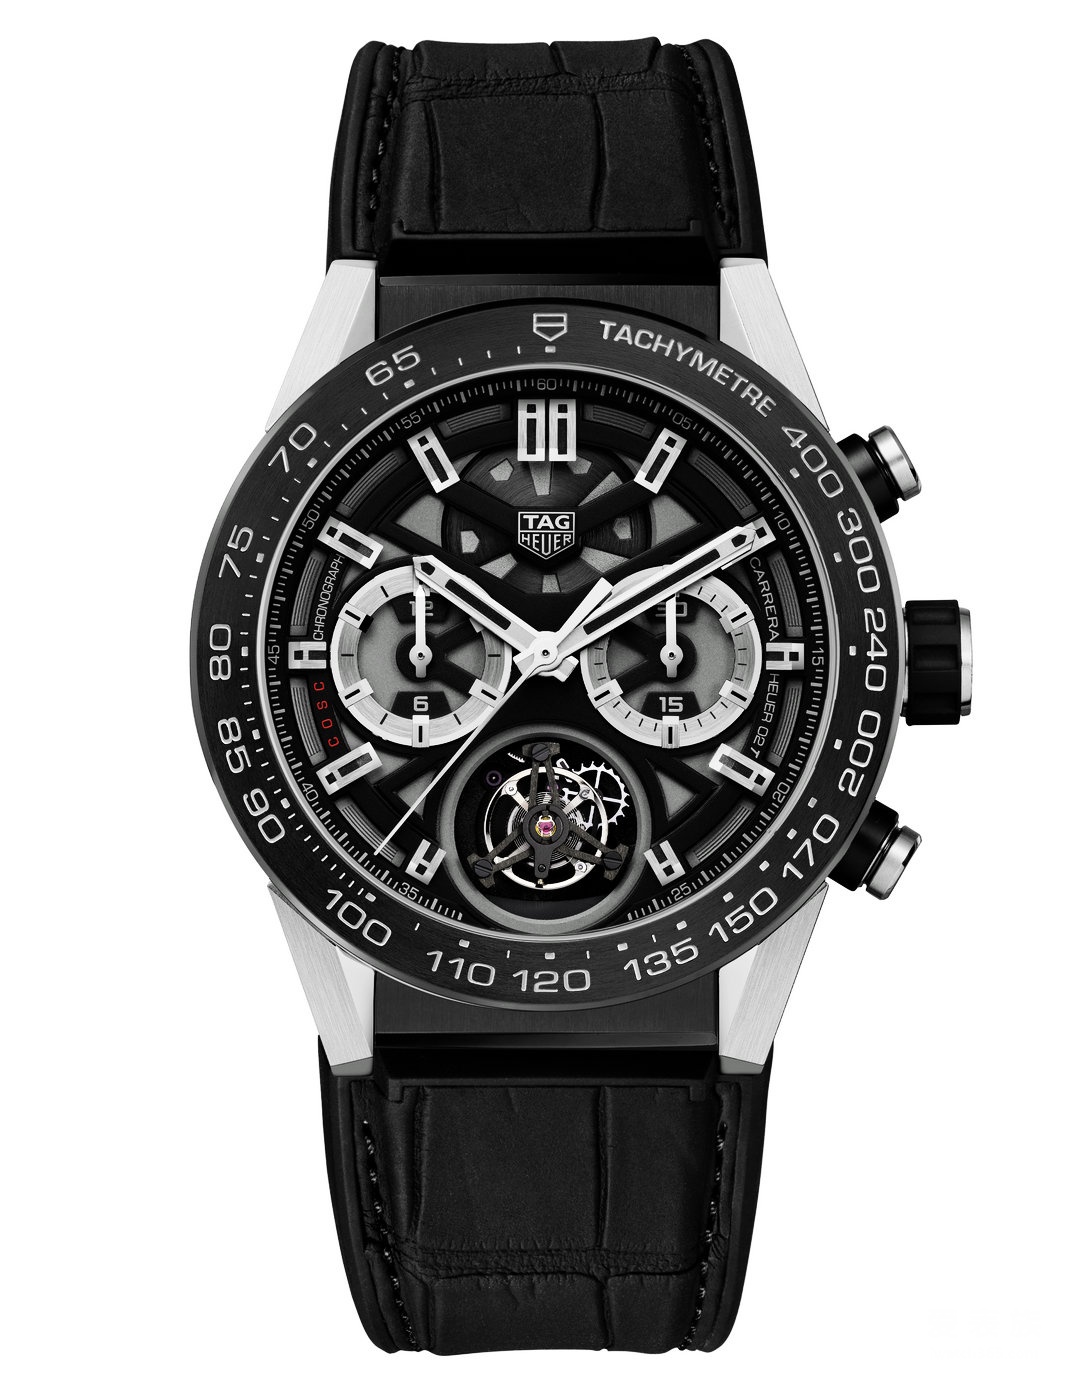 TAG Heuer Tiger Hau Accra Calera Heuer-02T COSC Swiss official observatory certification Automatic winding tourbillon chronograph